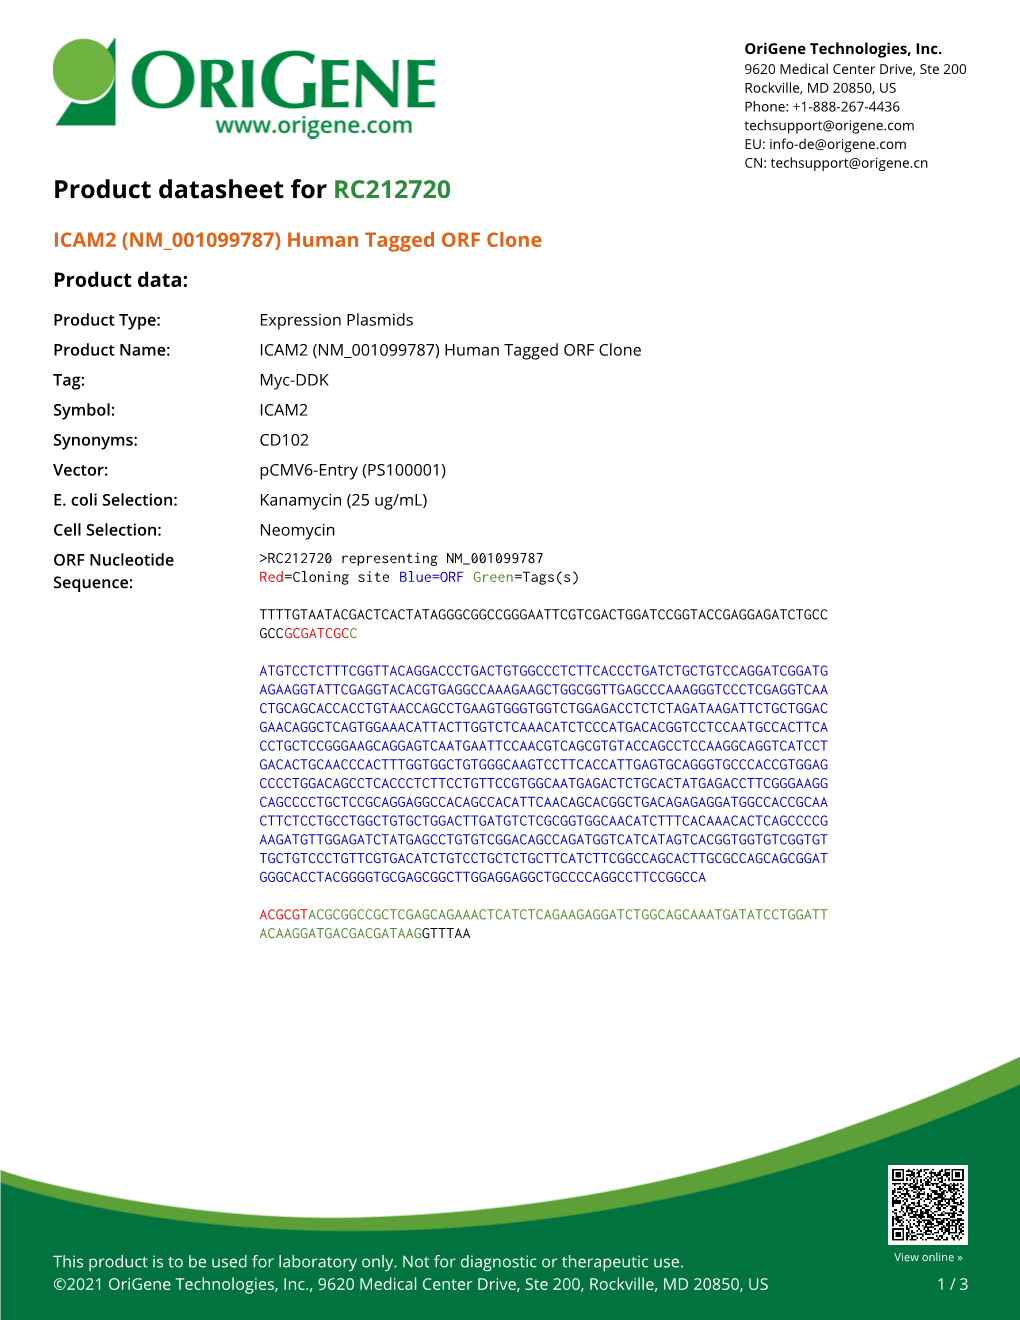 ICAM2 (NM 001099787) Human Tagged ORF Clone Product Data